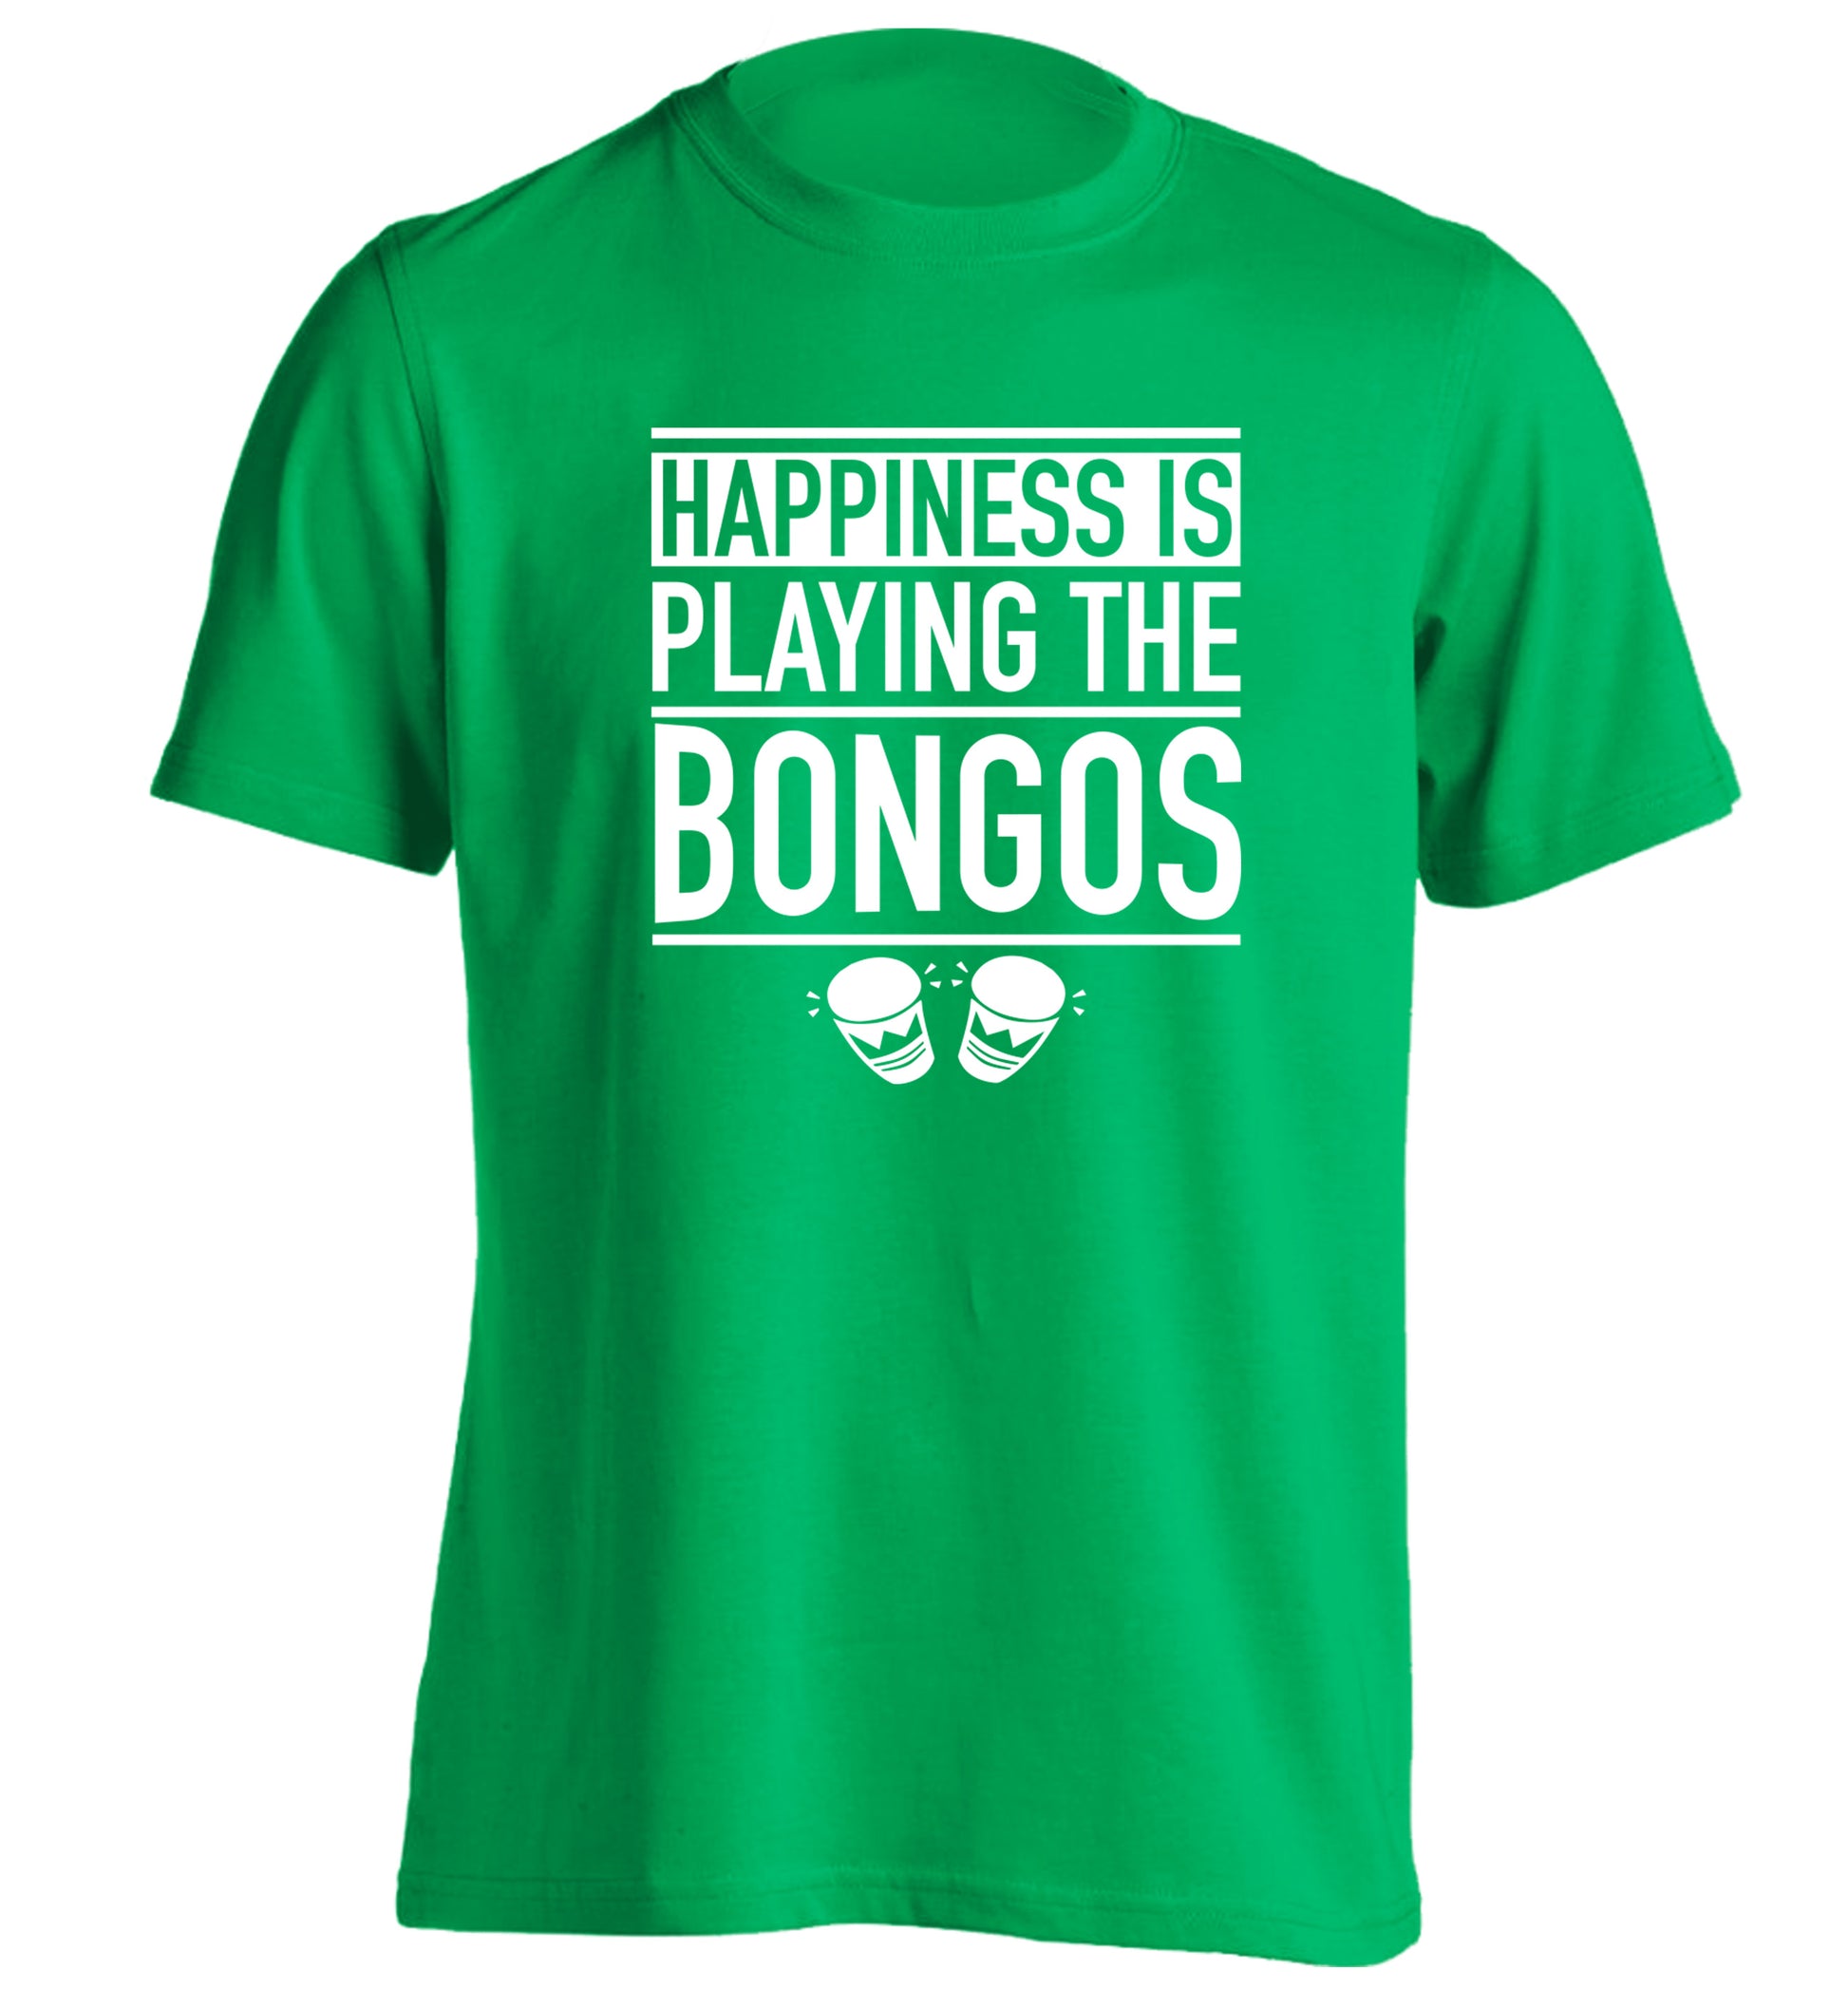 Happiness is playing the bongos adults unisex green Tshirt 2XL